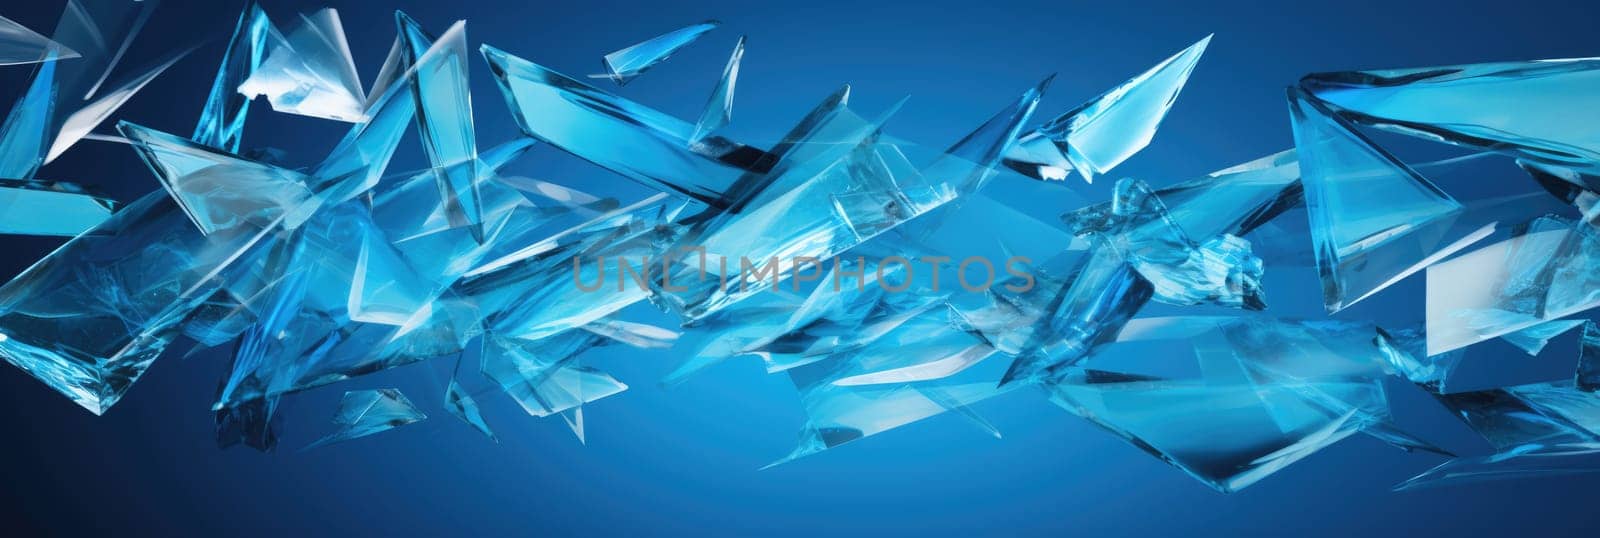 Flying glass fragments on a blue background. Wide format banner by natali_brill